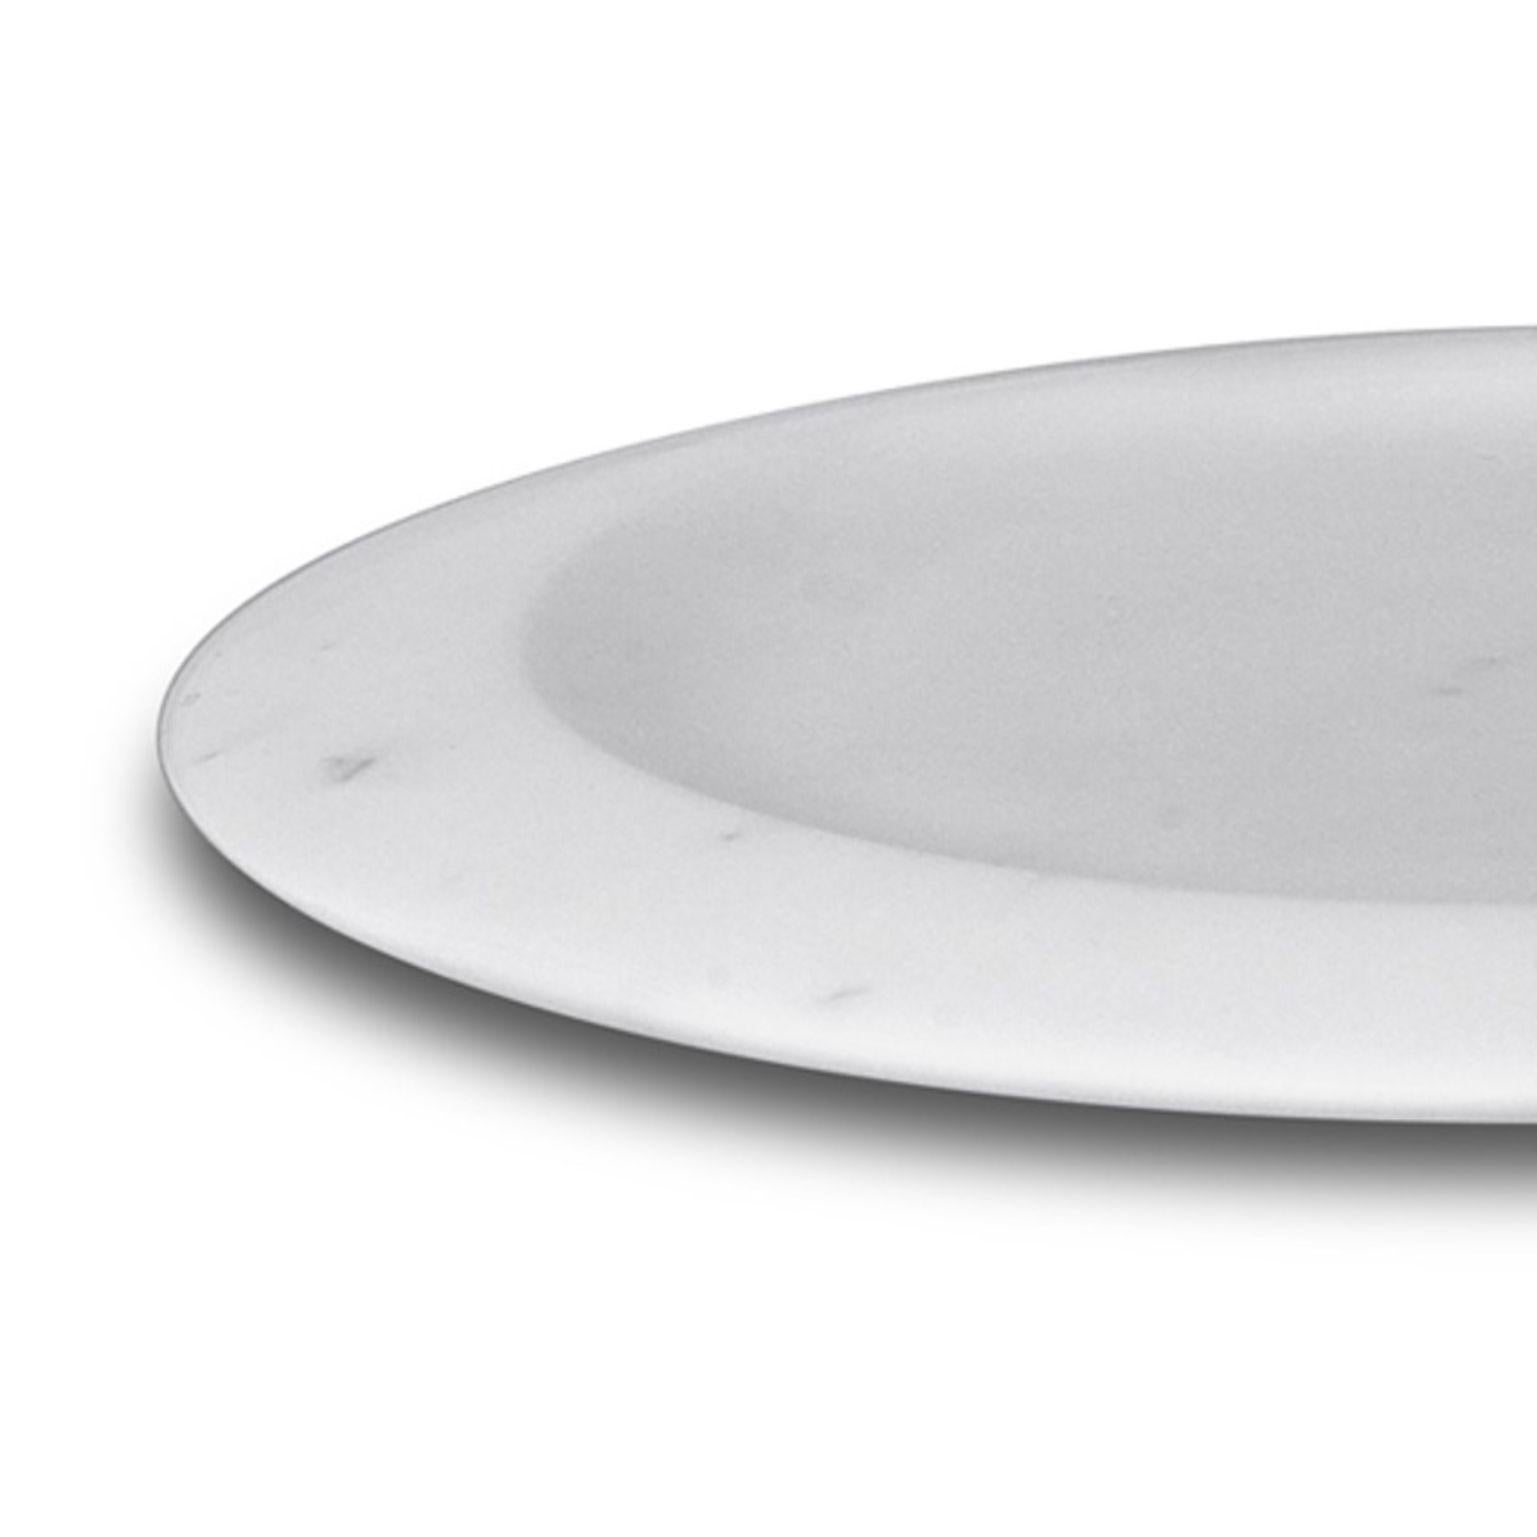 Modern Piatto Piano #2, Dining Plate, White by Ivan Colominas